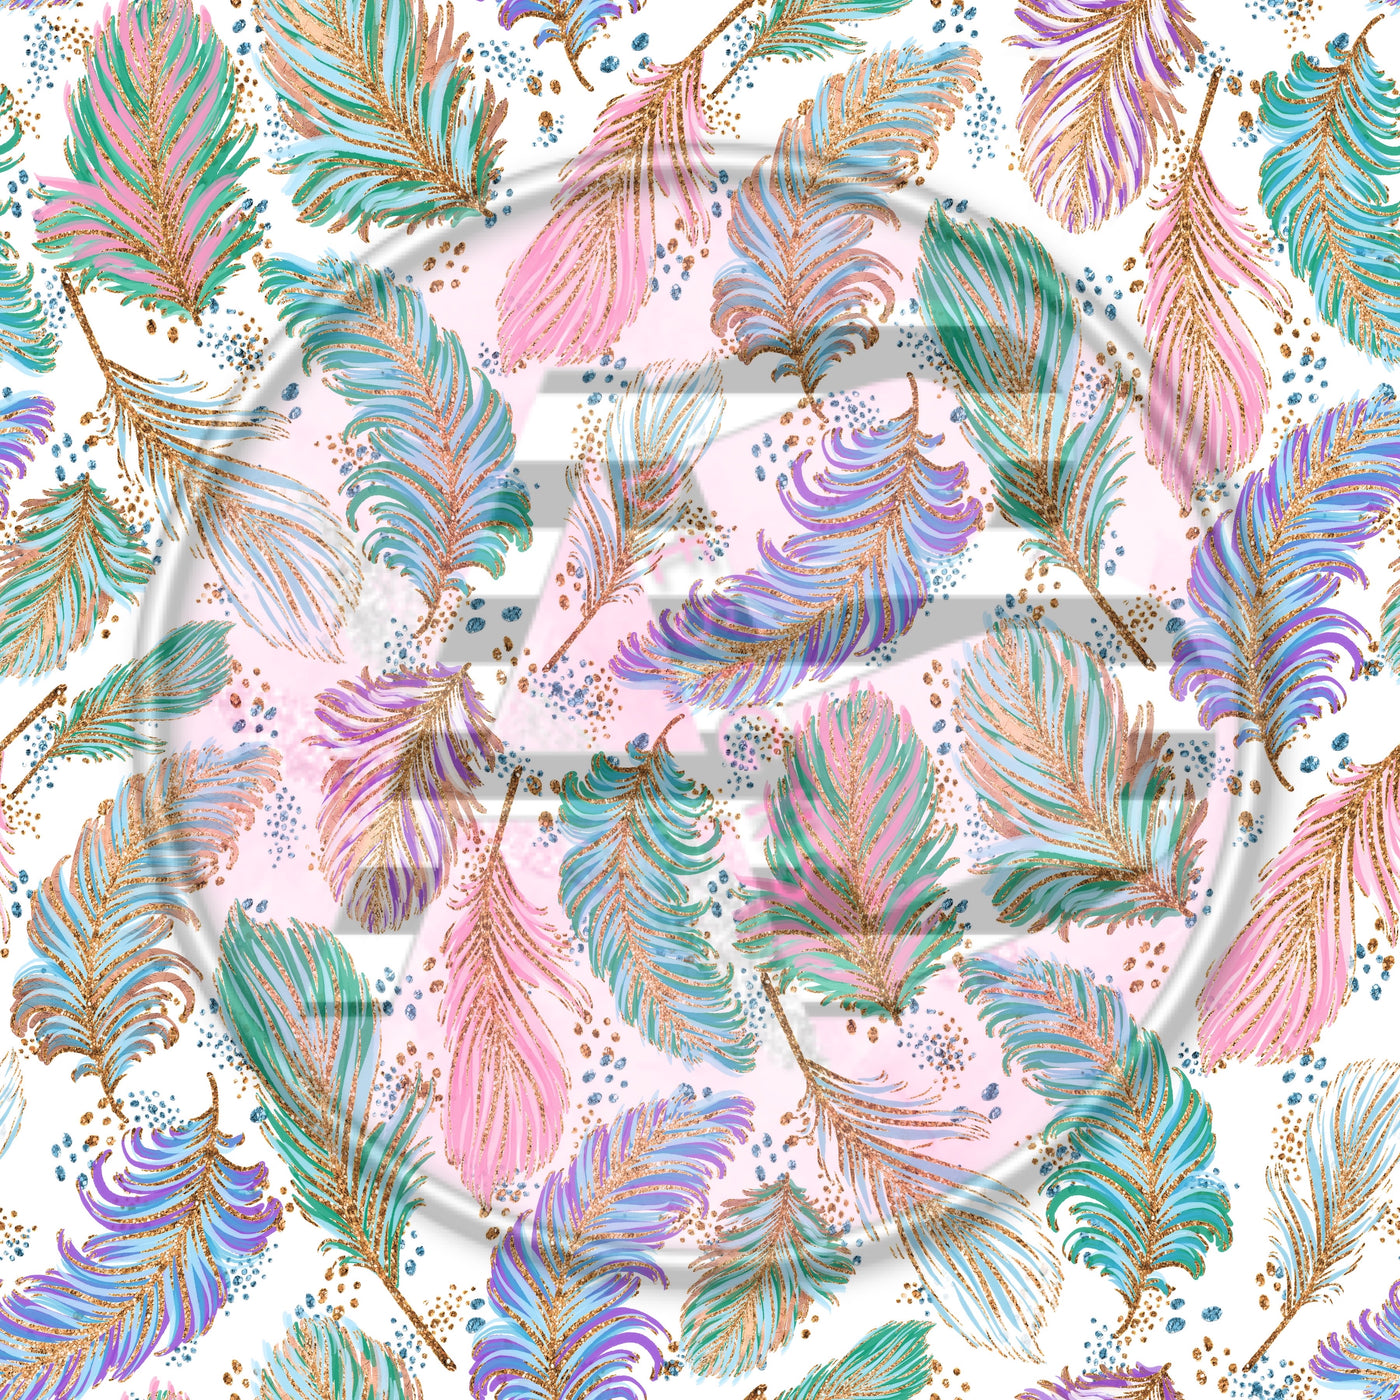 Adhesive Patterned Vinyl - Feathers 164